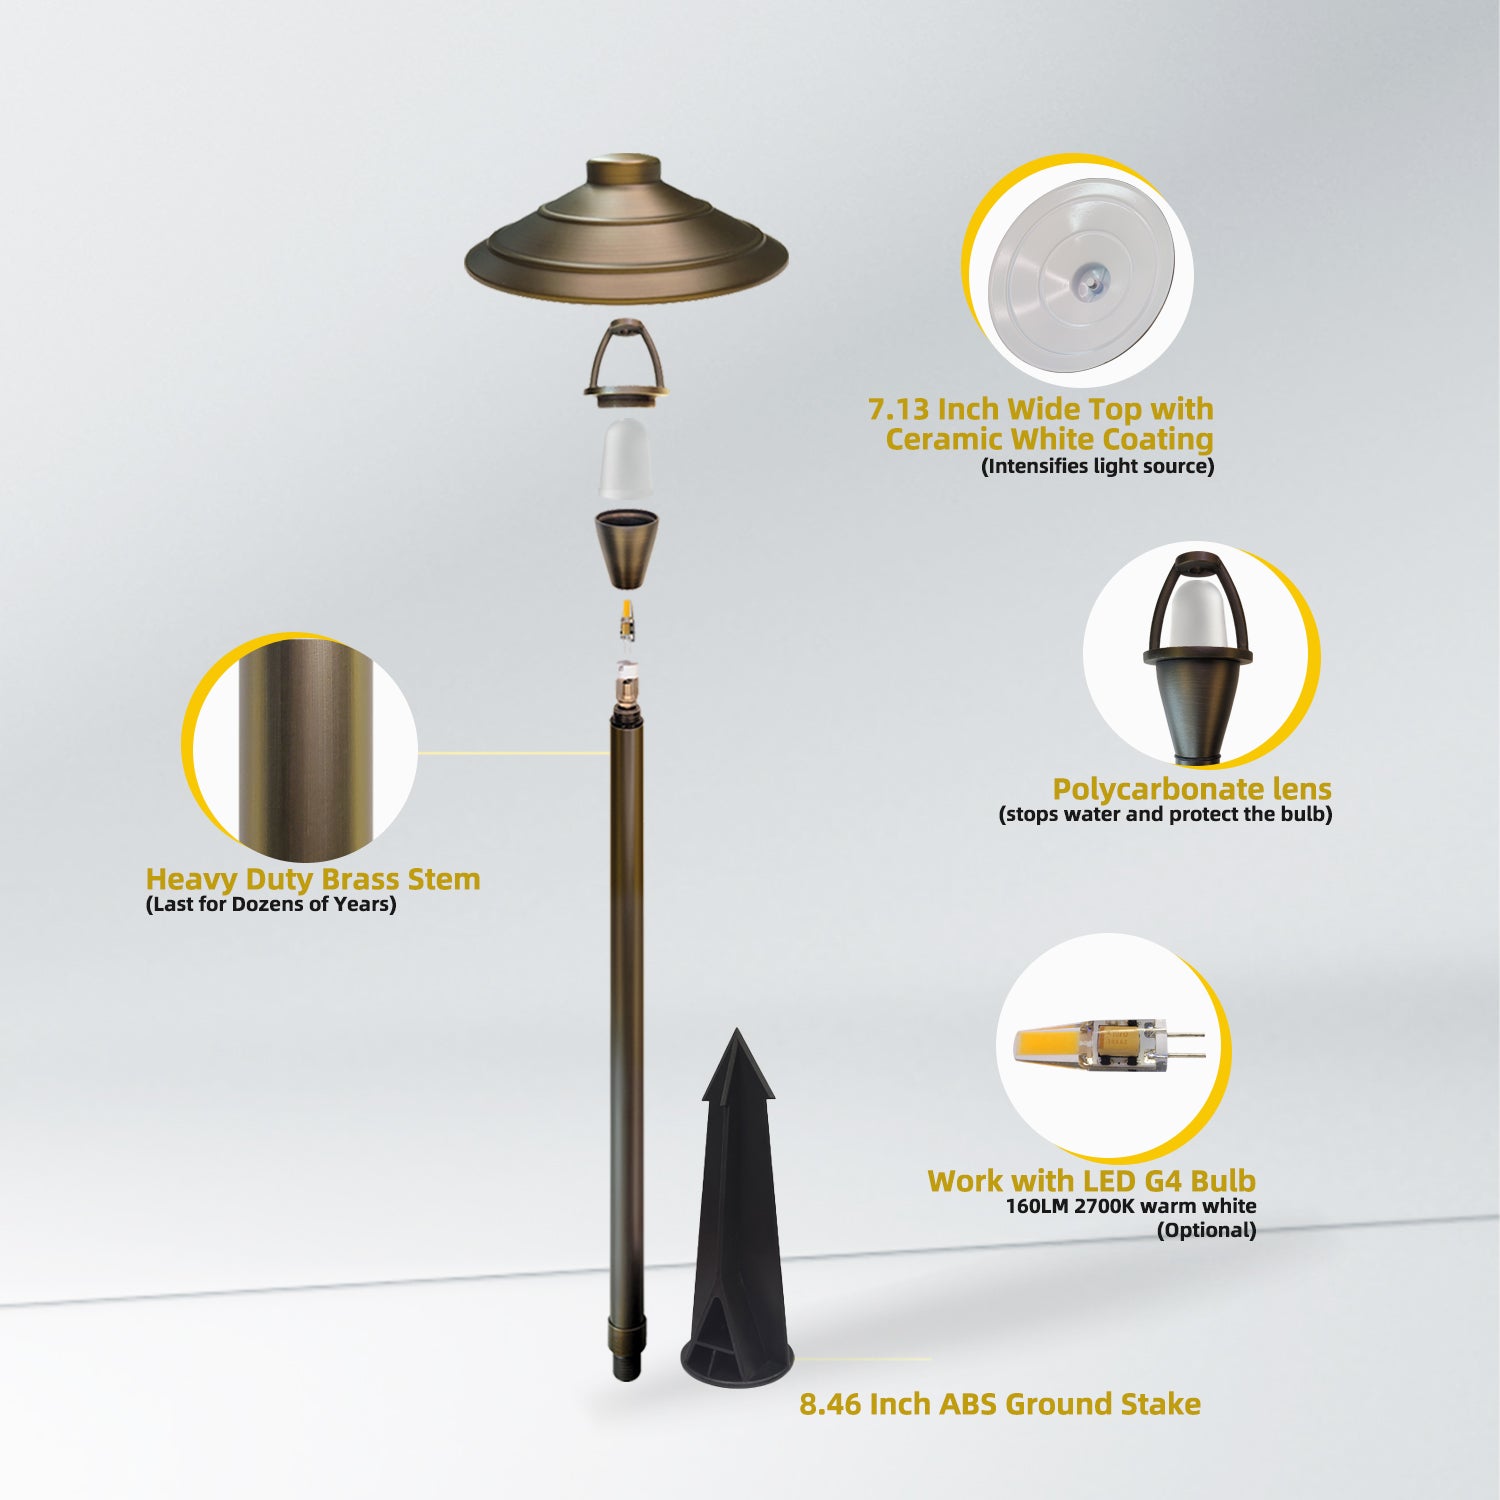 Components of the LED low voltage brass garden pathway light model COP601B, featuring ceramic top, polycarbonate lens, heavy-duty brass stem, ABS ground stake, and optional warm white LED G4 bulb.